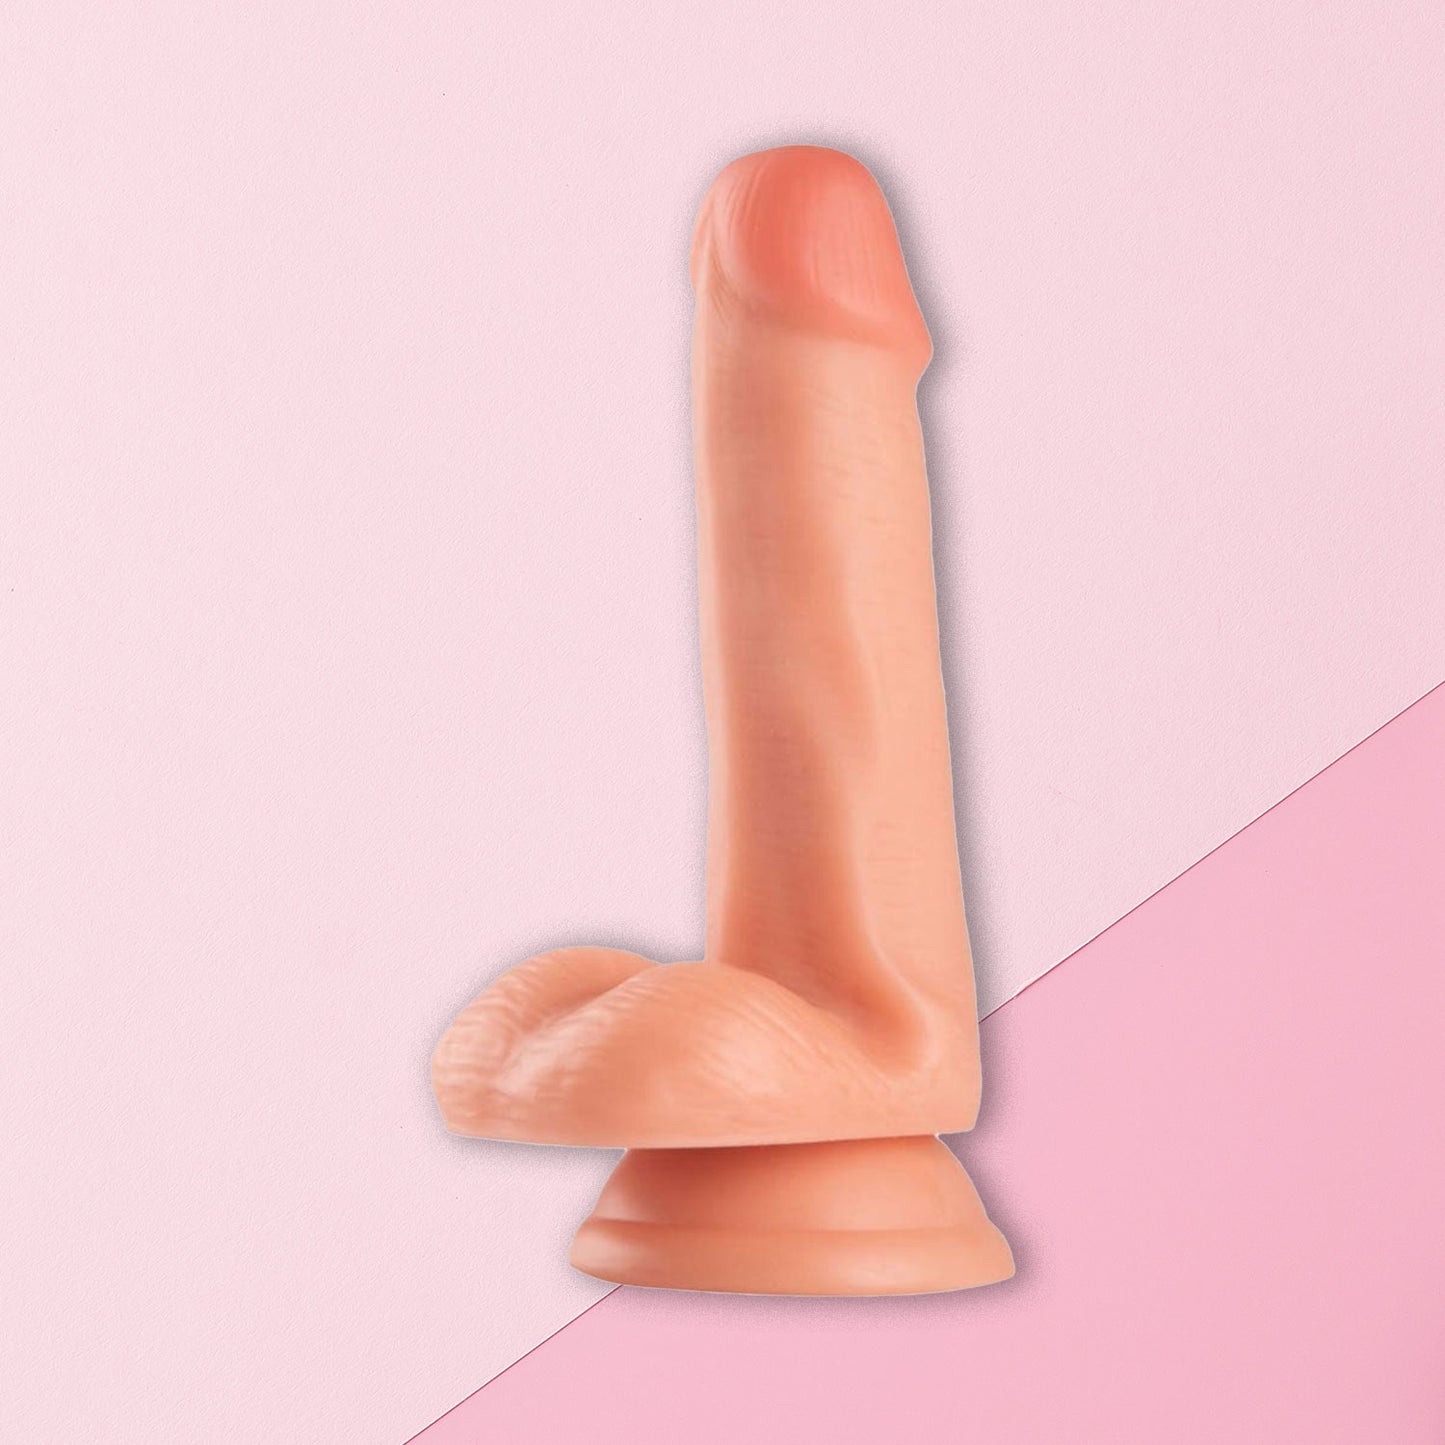 The Horny Company - No Frills Dildo 16cm x 3.5cm Suction Cup Dong with Balls